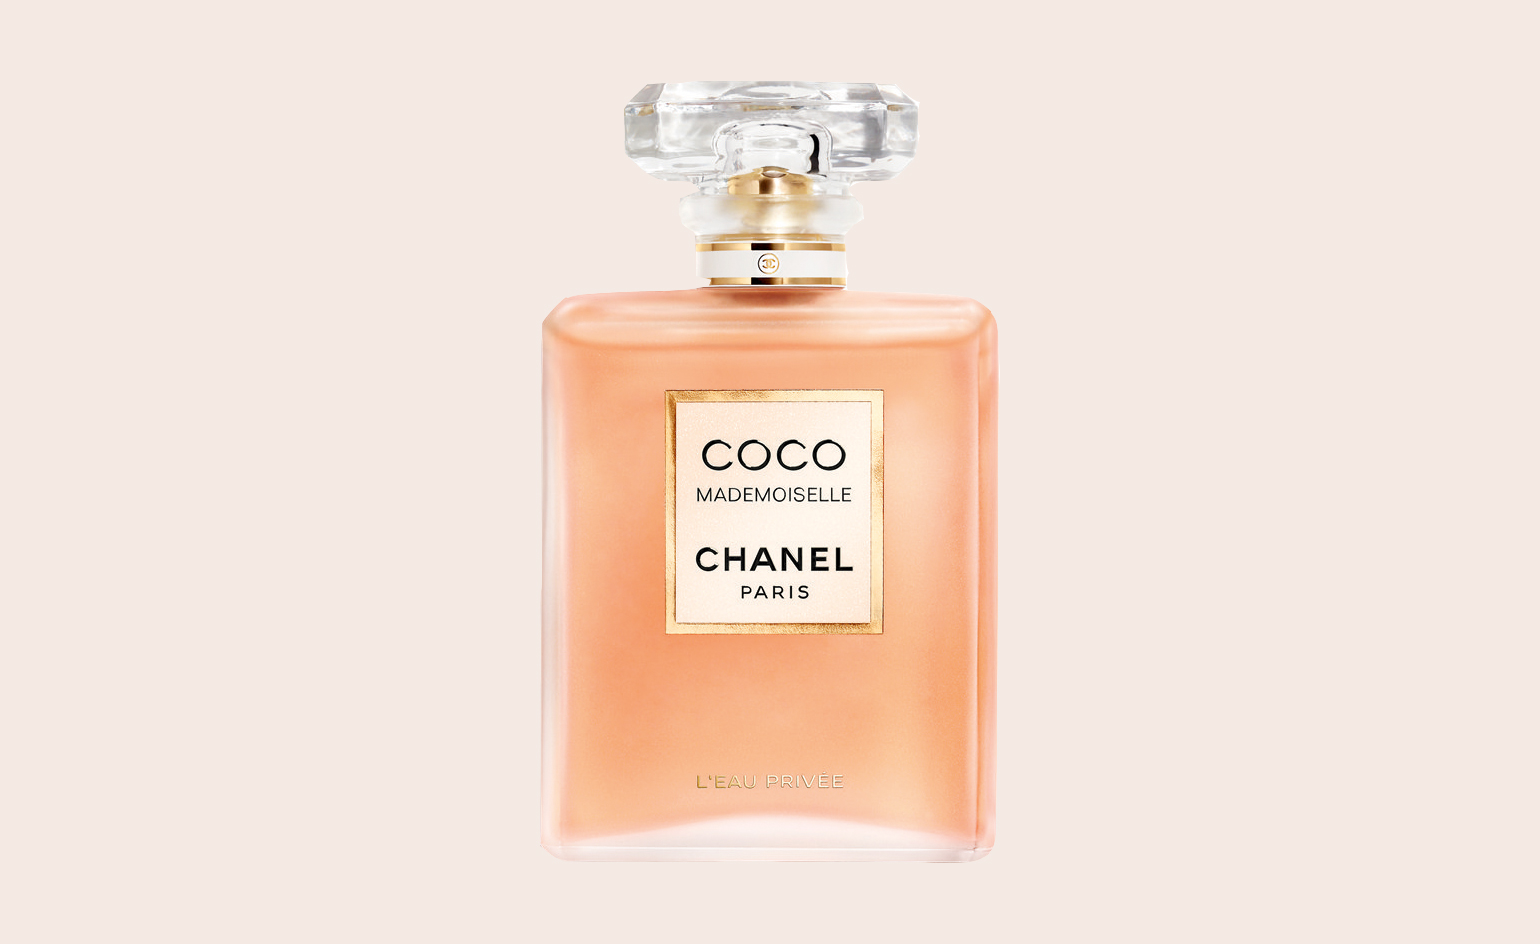 Sweet Dreams: Chanel's classic fragrance gets ready for bed | Wallpaper